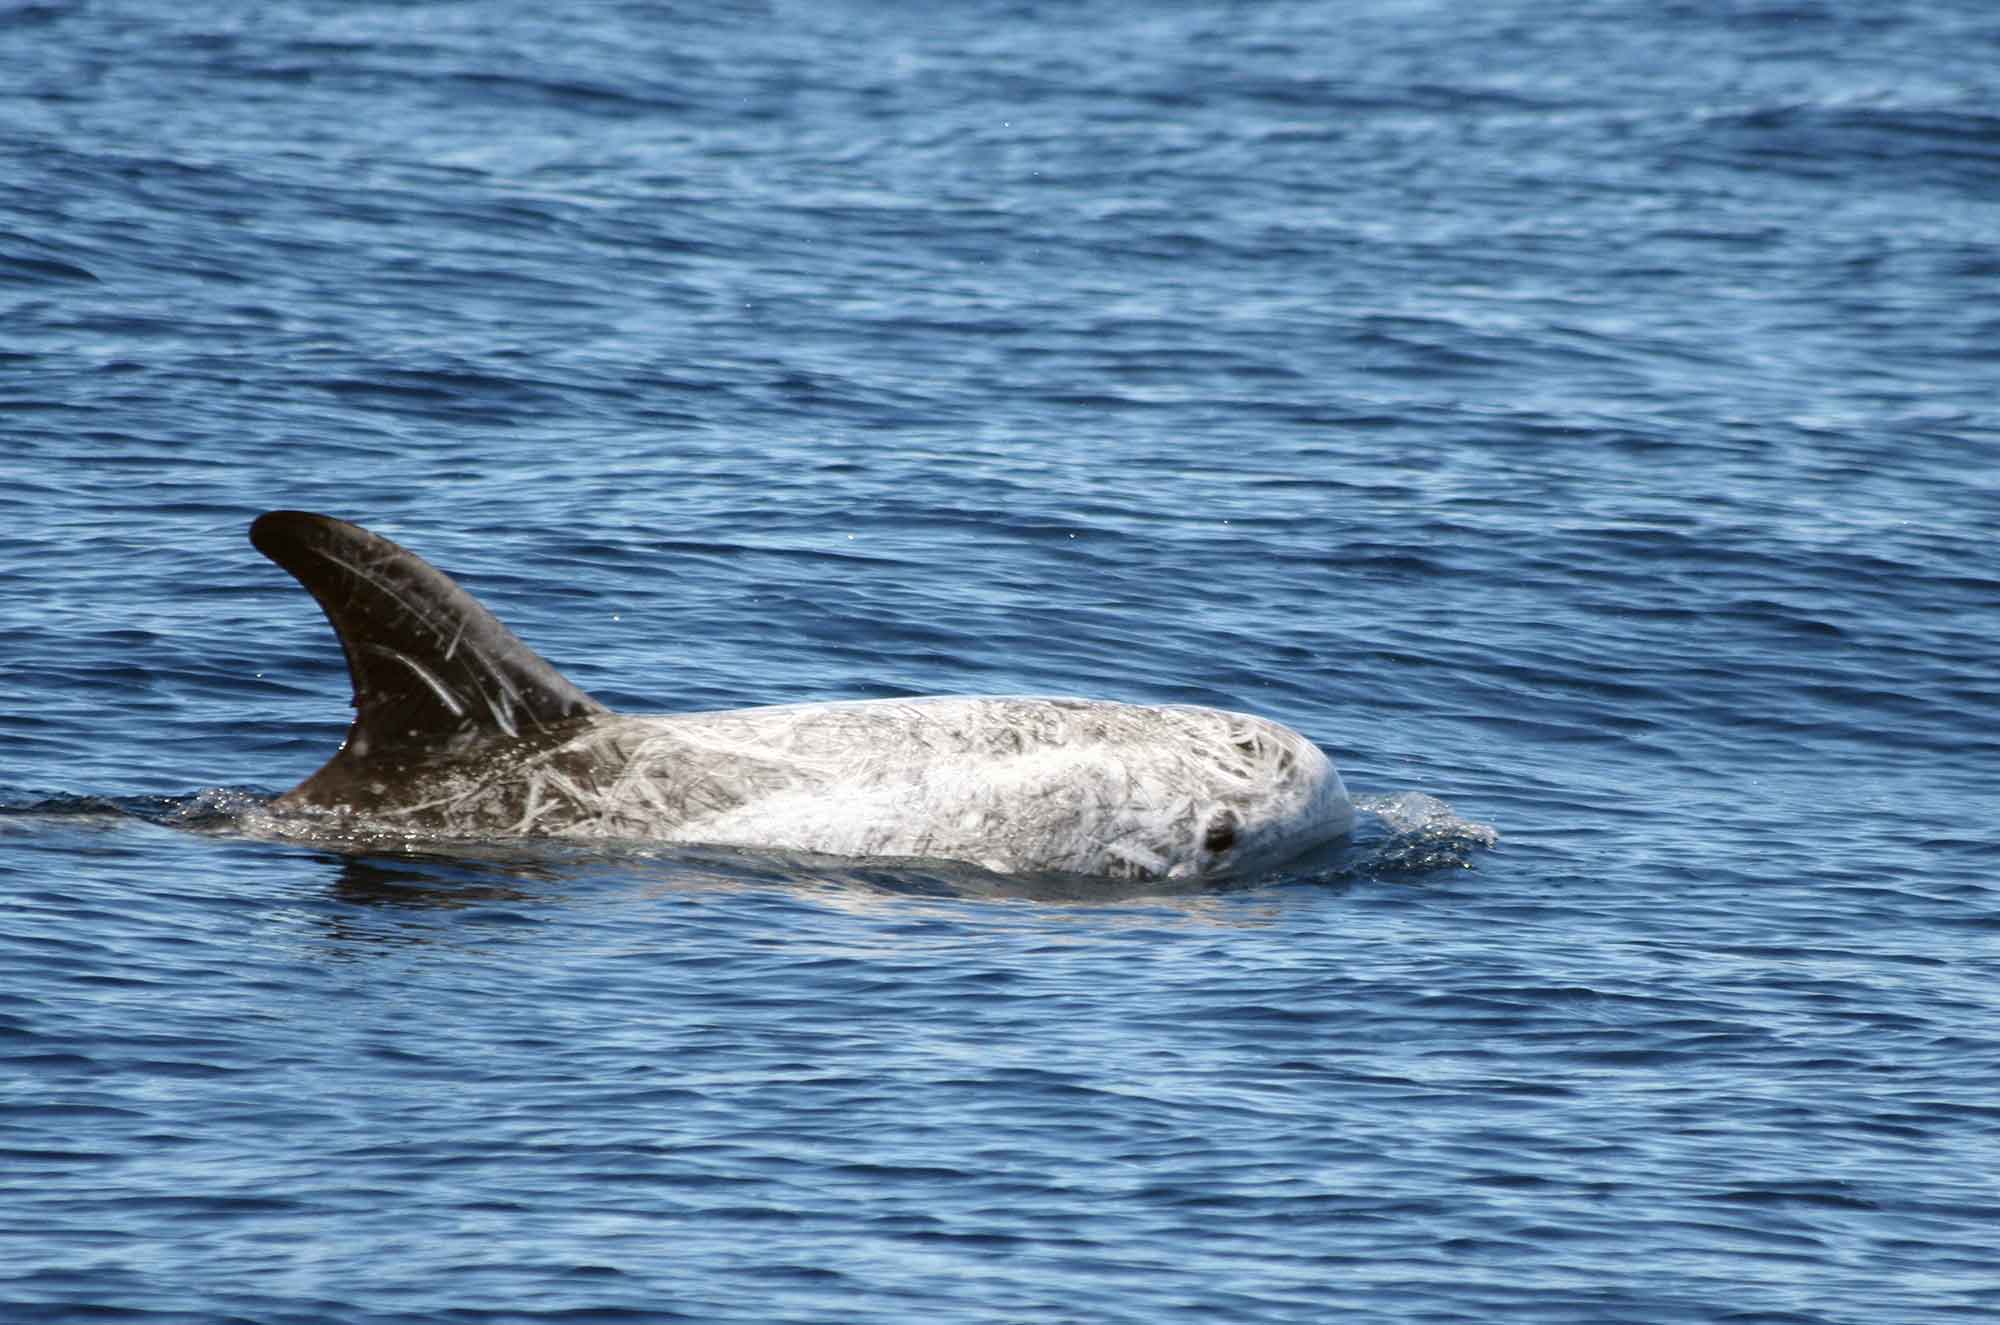 Risso's dolphin are a resident deep water cetacean species off San Diego.